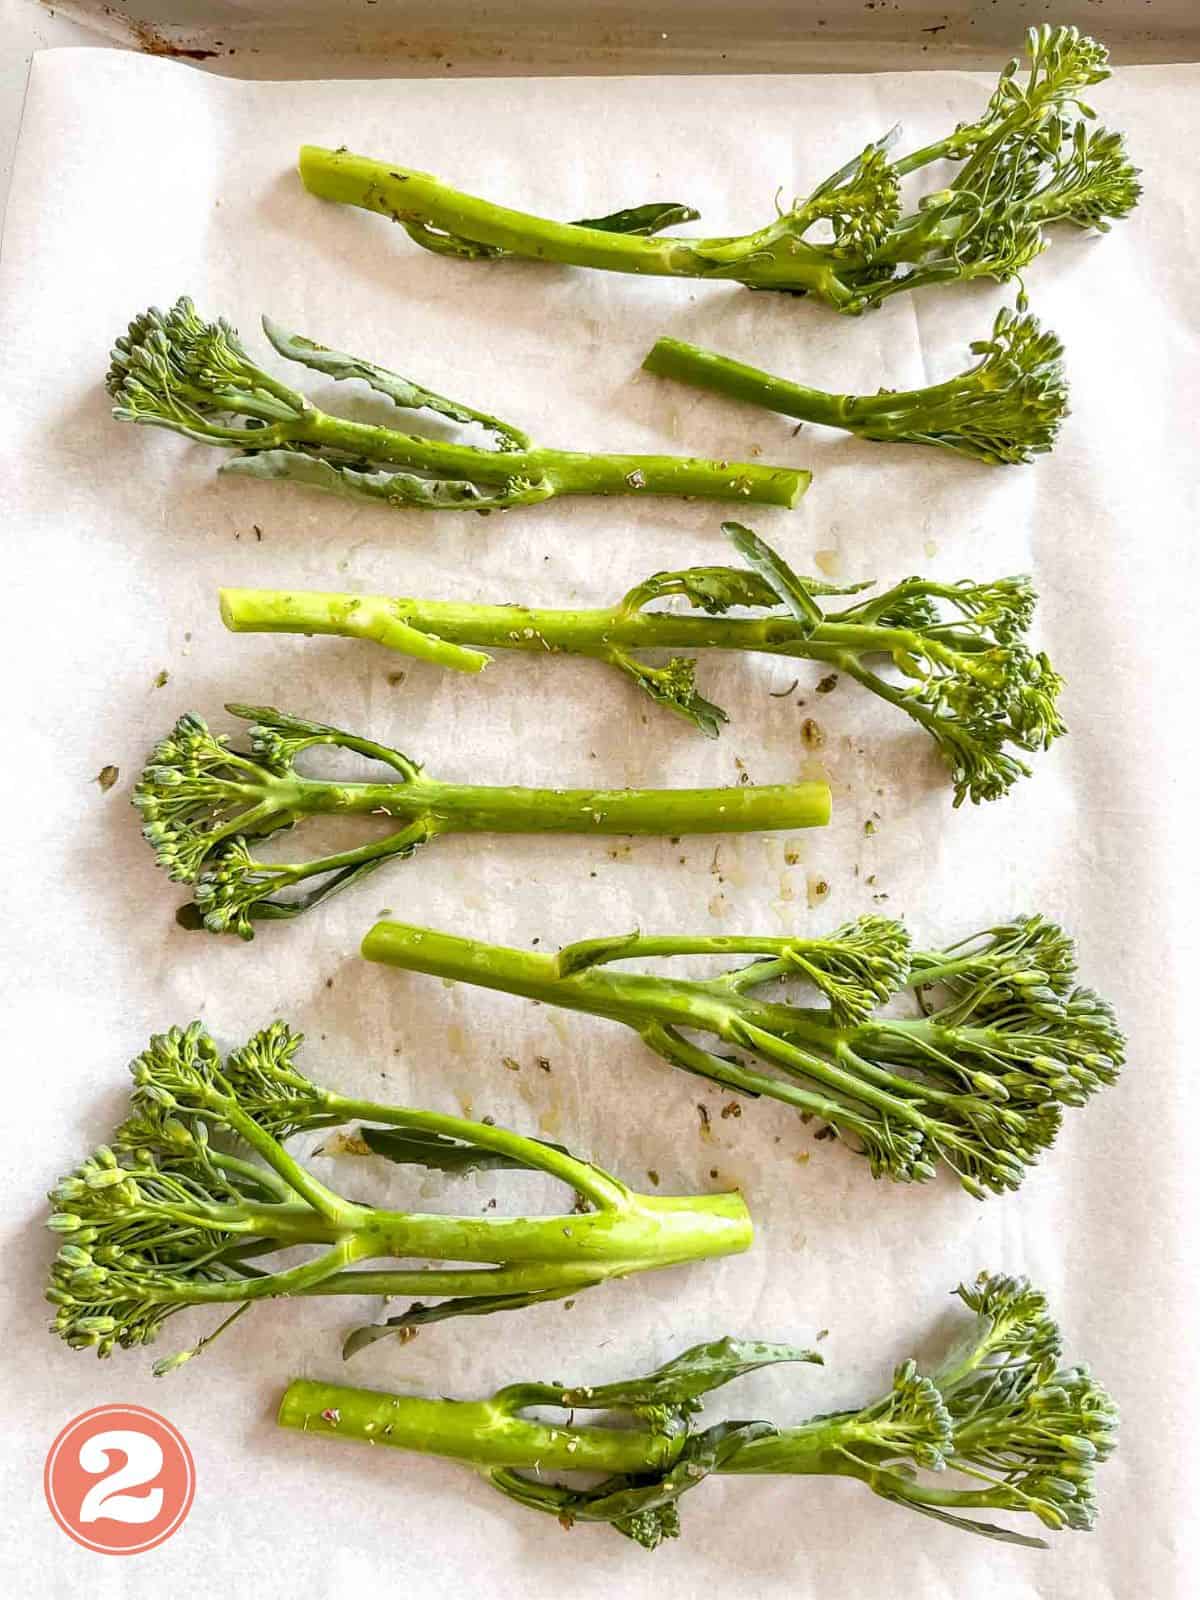 tenderstem broccoli drizzled with olive oil and sprinkled with herbs on a lined baking sheet labelled number two.